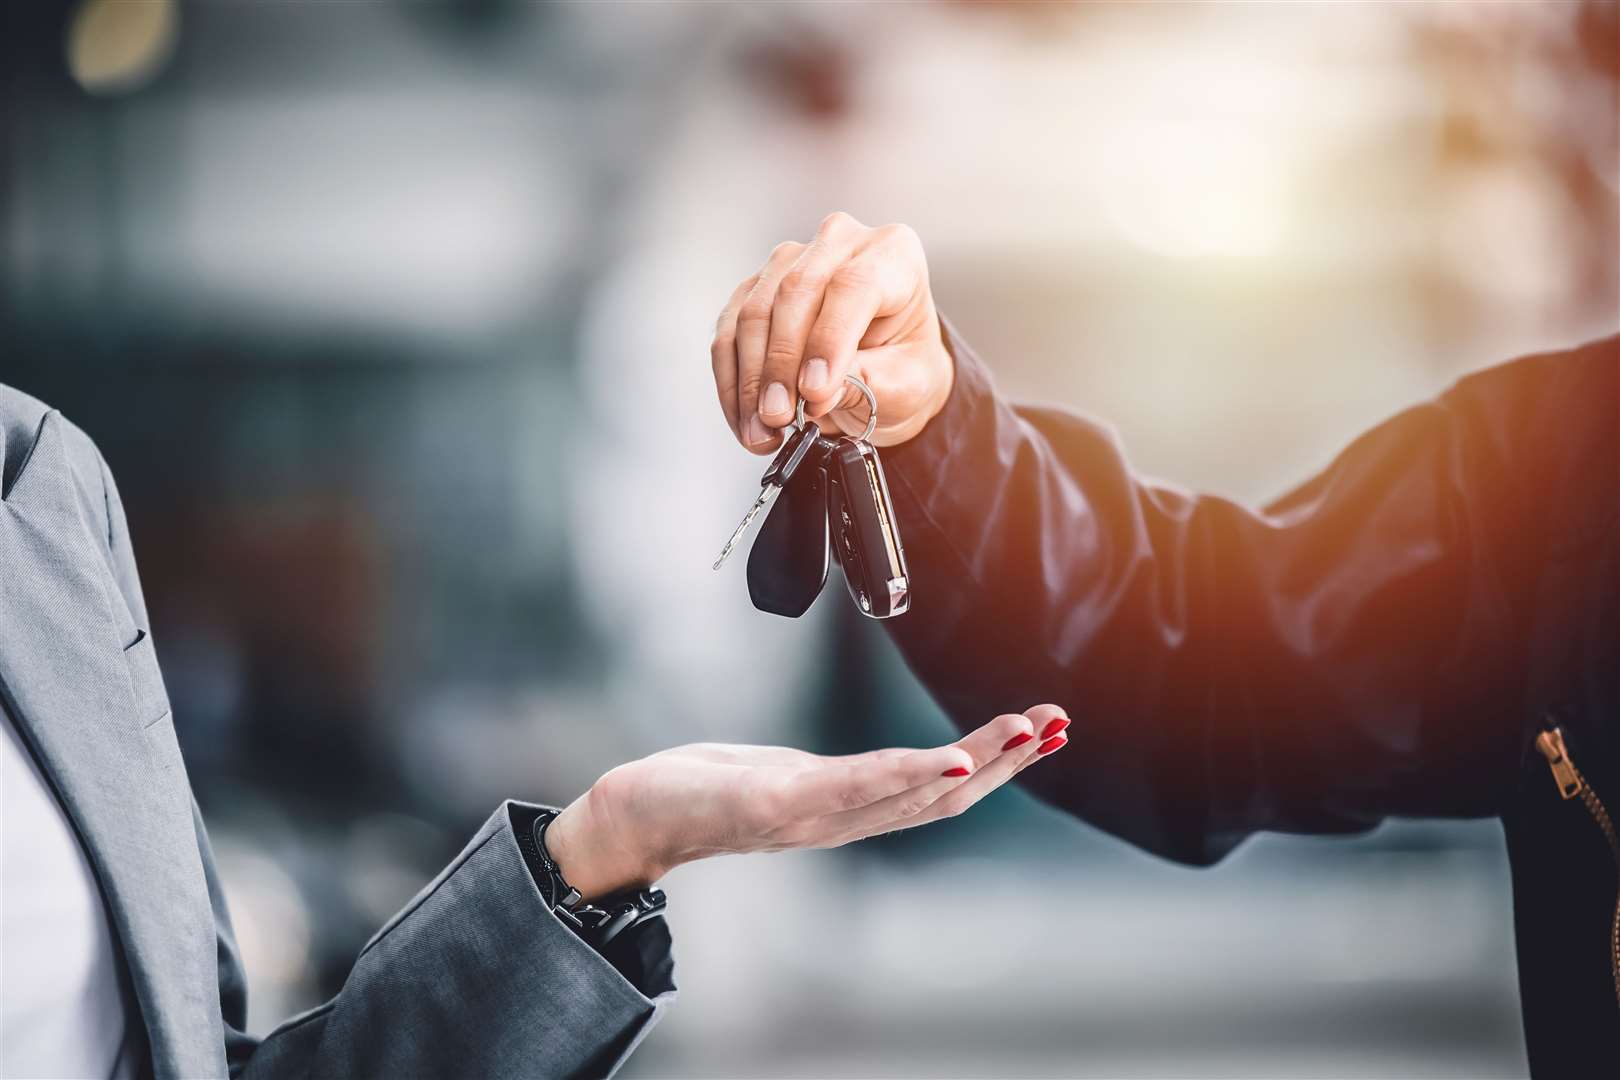 Discretionary commission arrangements created an incentive for brokers to increase how much people were charged for their car loan. Image: iStock.